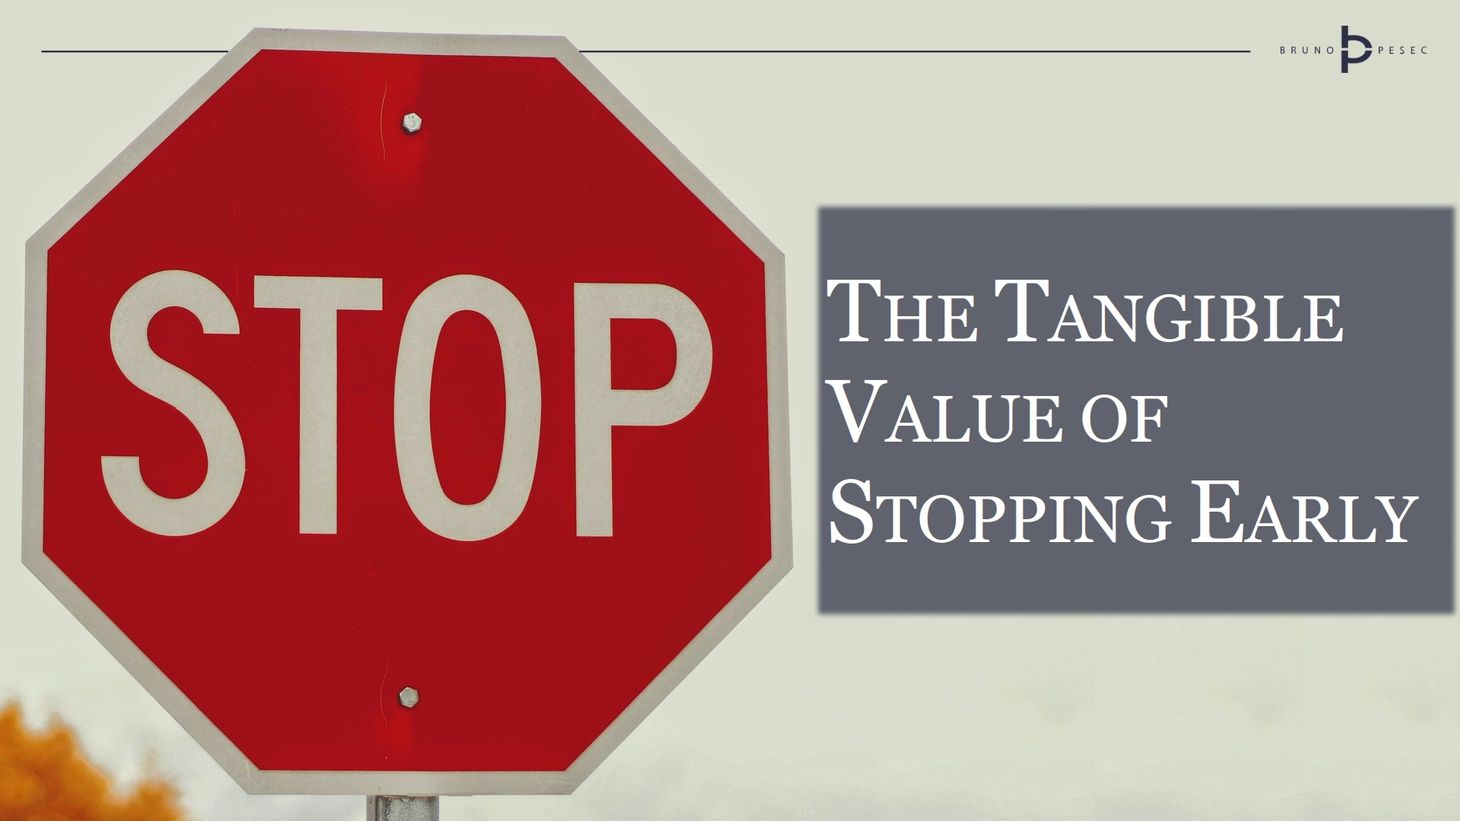 The tangible value of stopping early